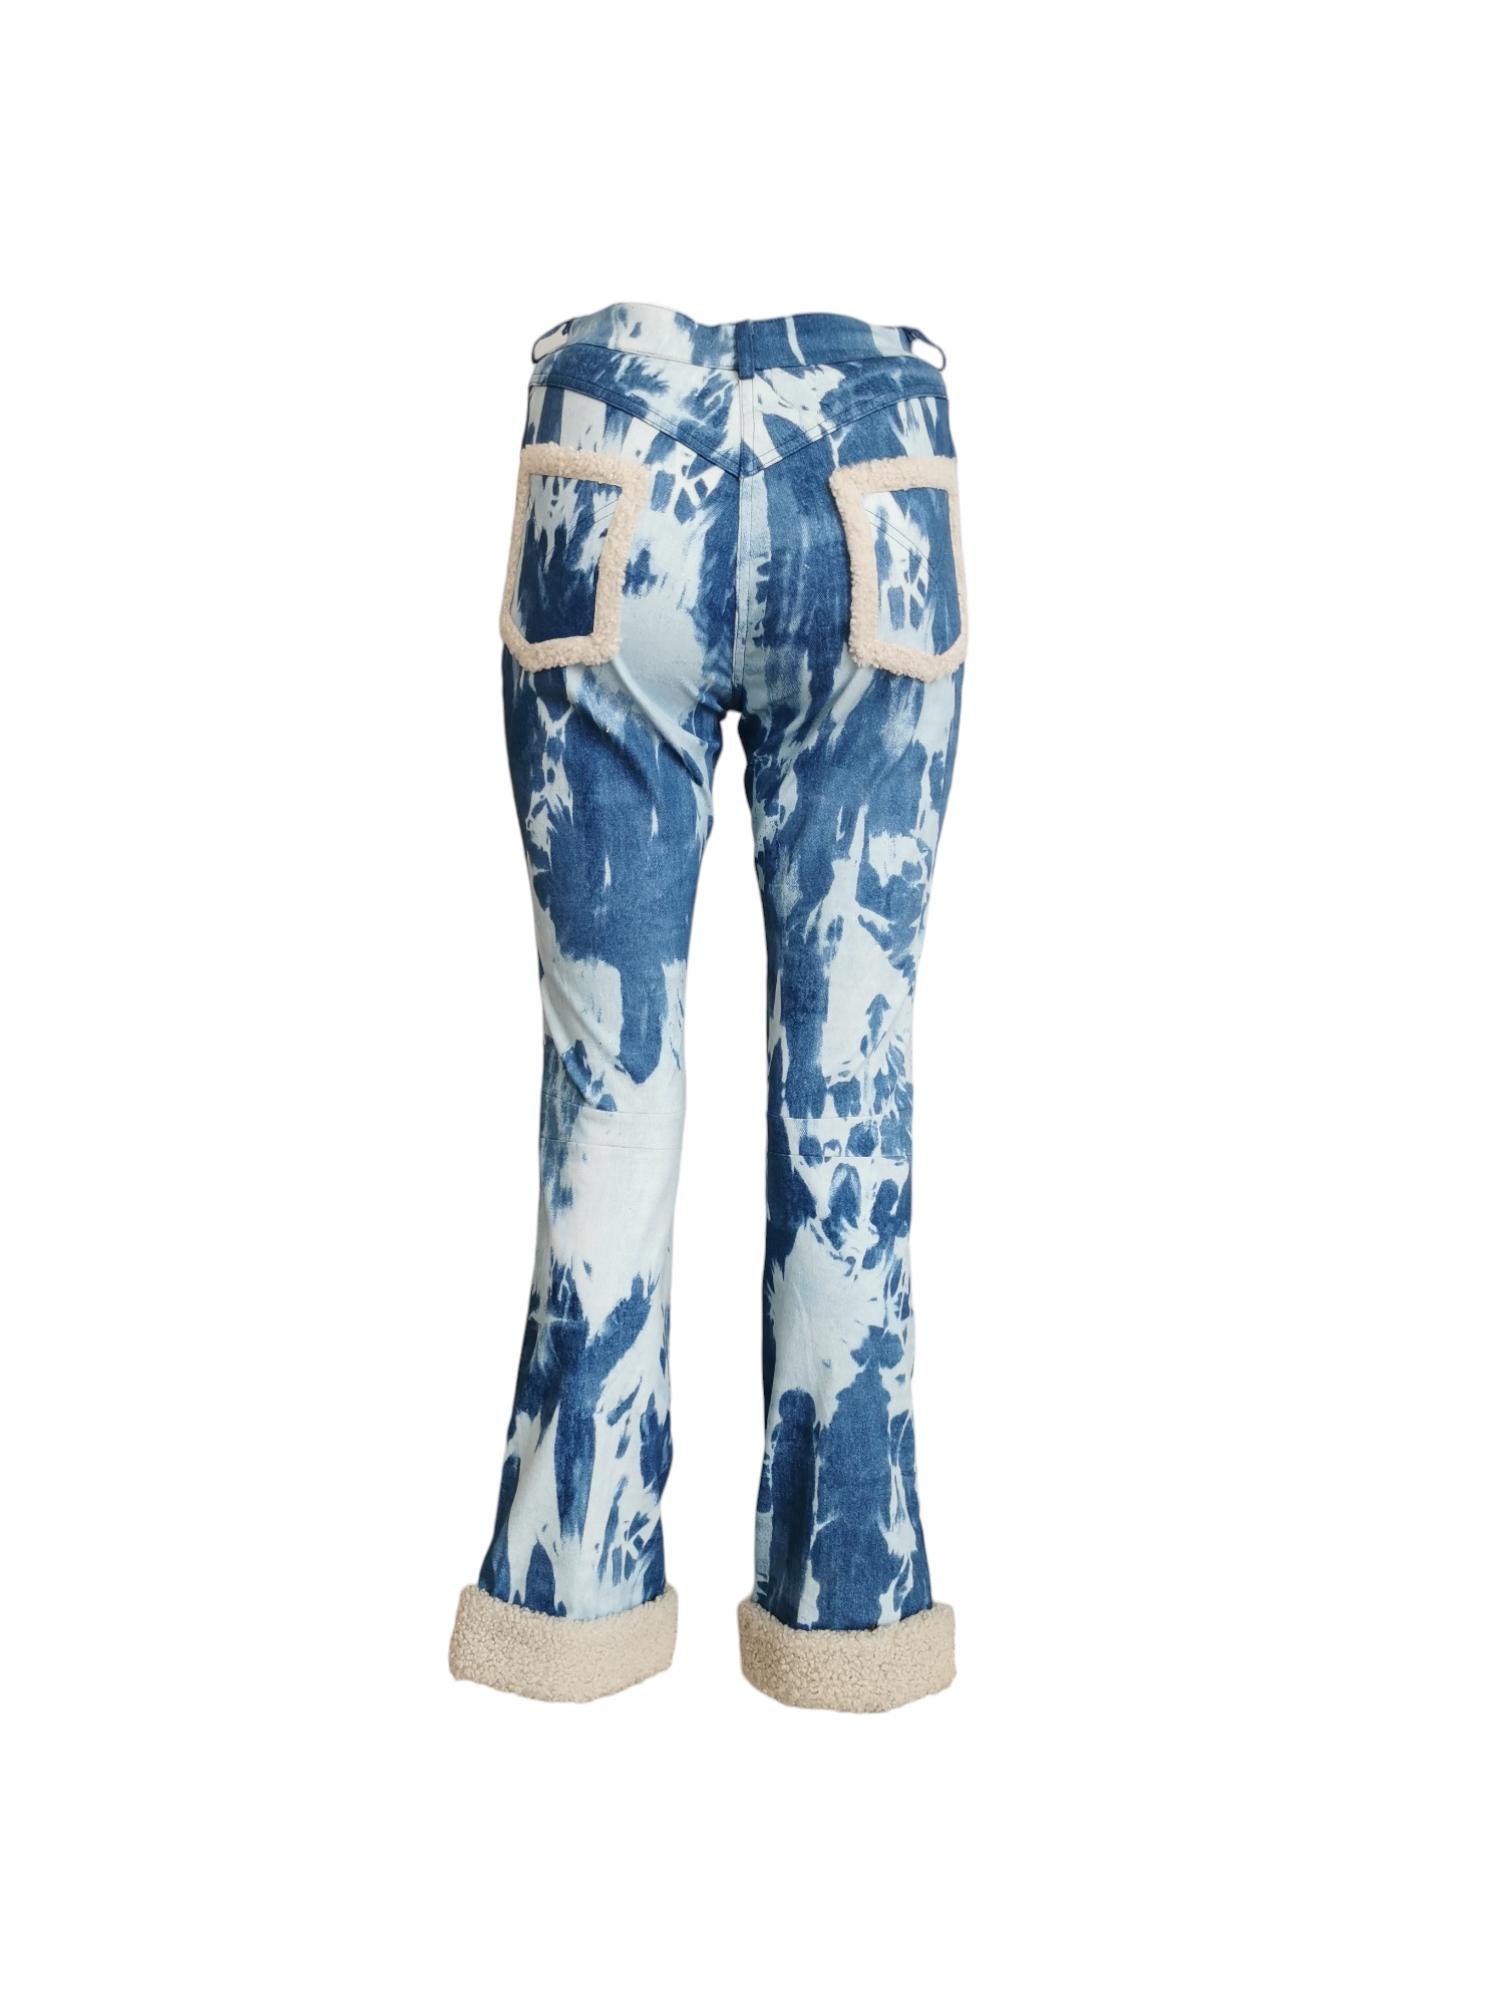 “Welcome to all our Super Fly Girls” (Vogue, 2000). During the Dior 2000fw collection two main themes were featured: monogram and tie dye. These jeans seem to be a very close version to the runway pair of look 28. The pants have shearling cuff and